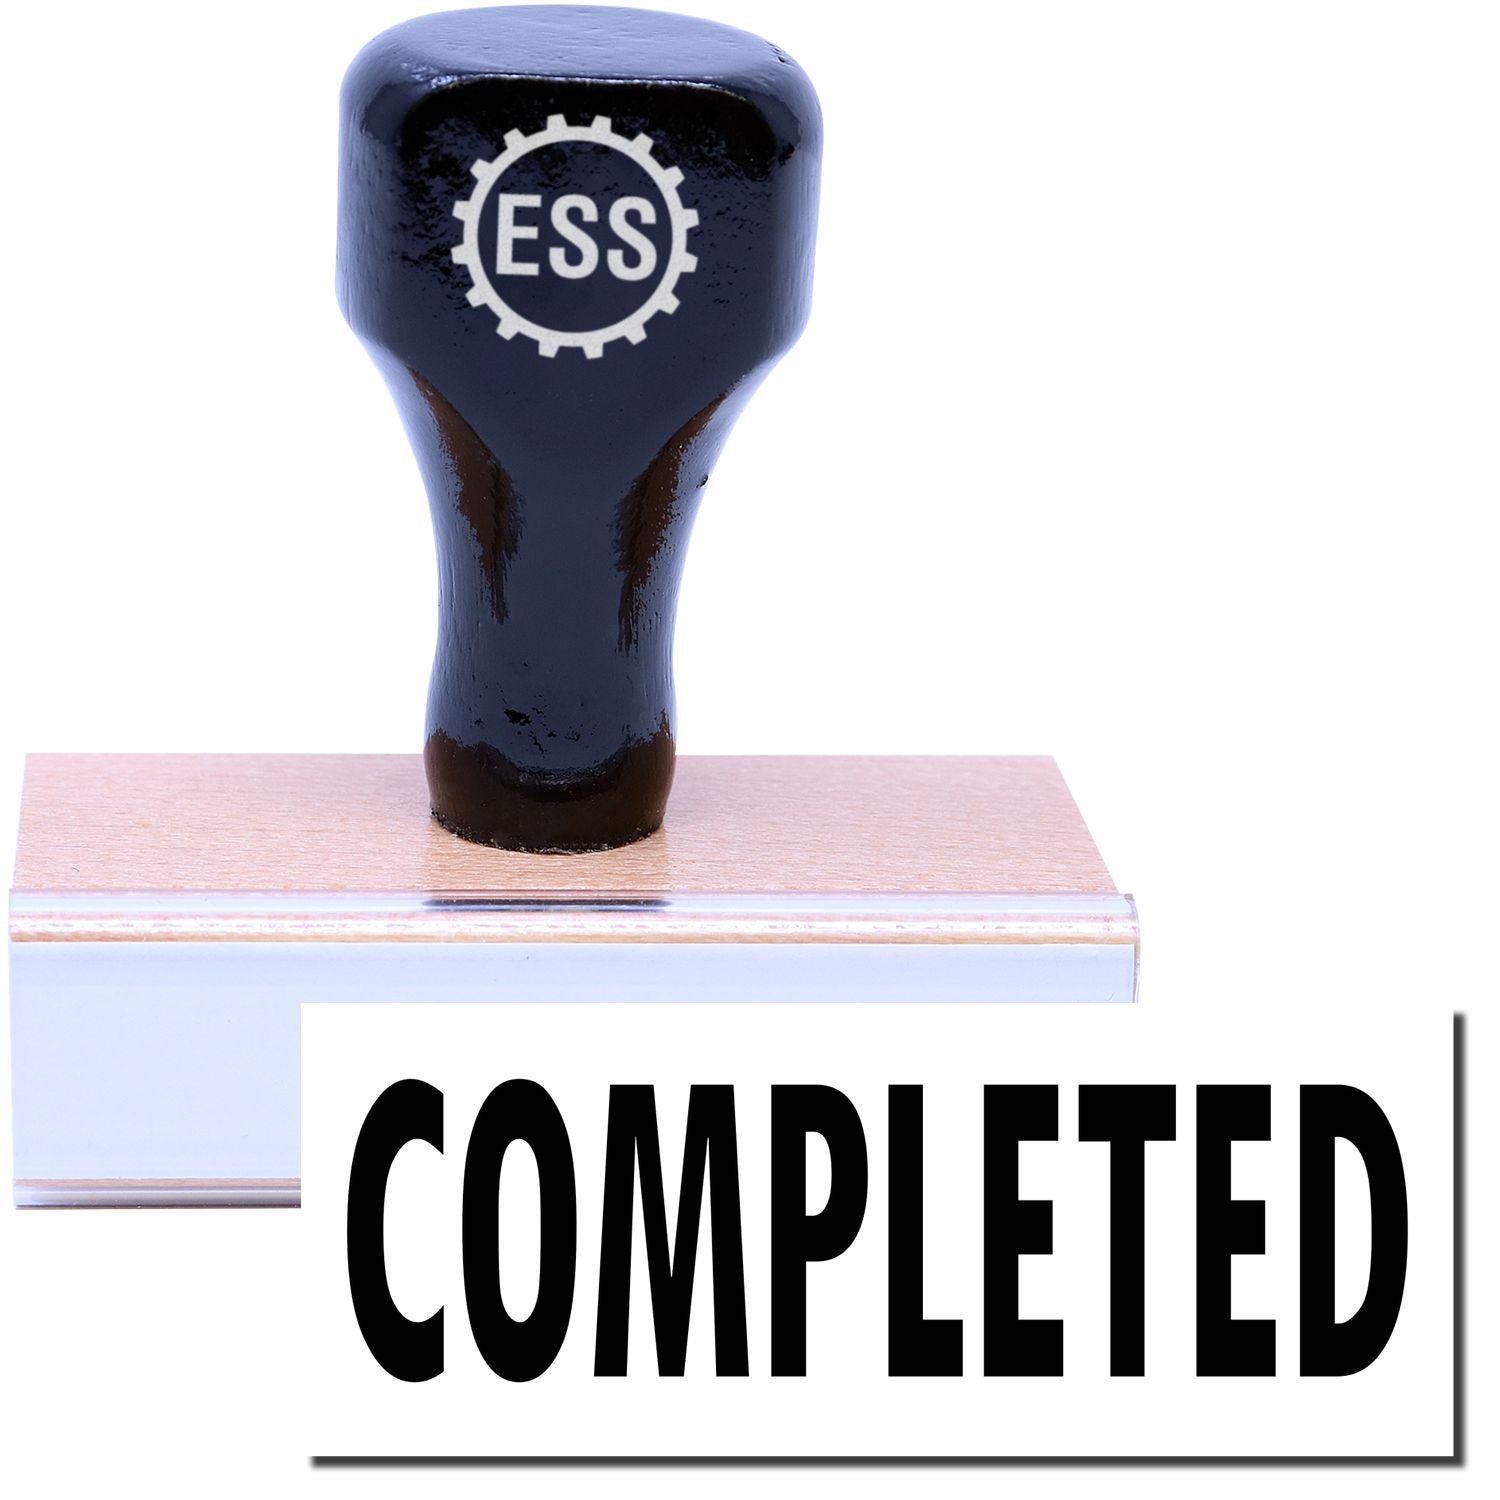 A stock office rubber stamp with a stamped image showing how the text "COMPLETED" is displayed after stamping.